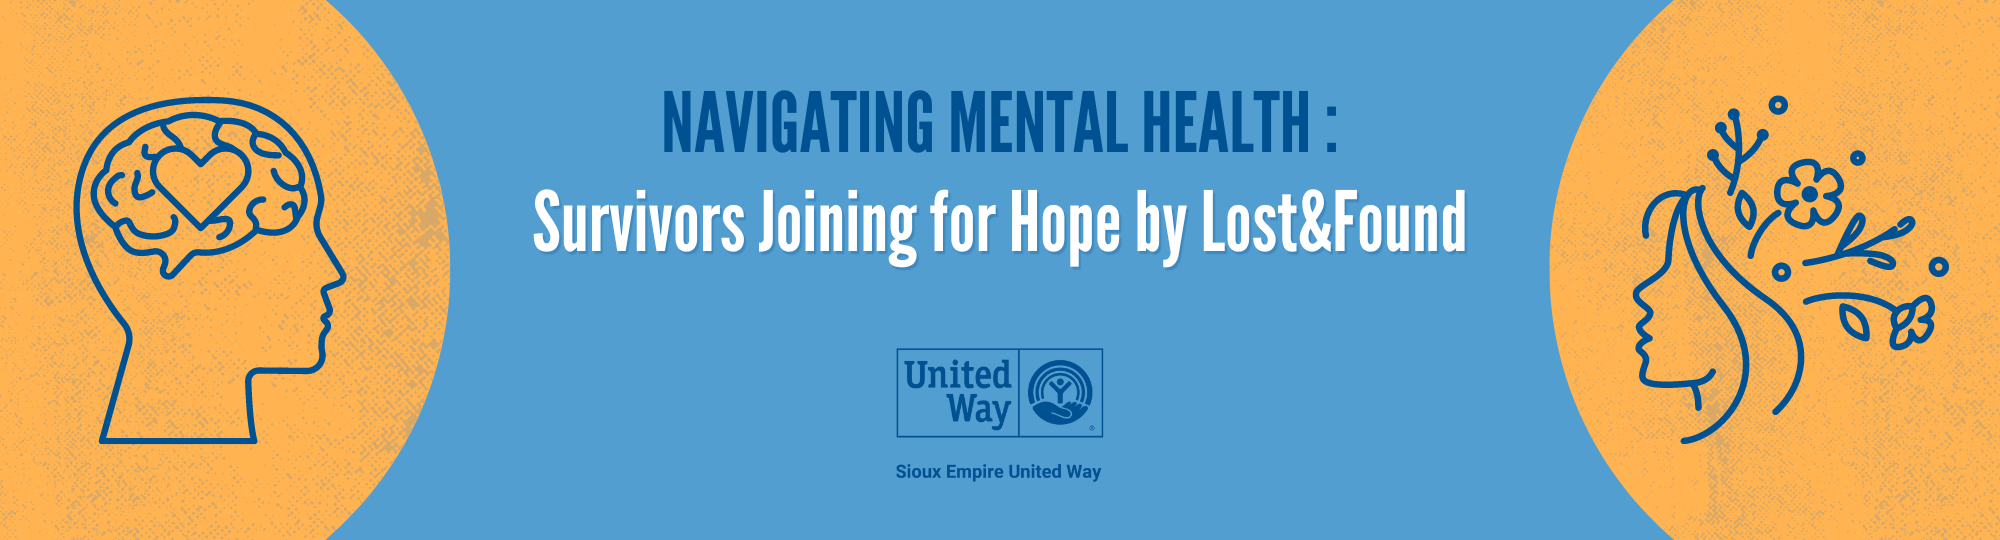 Blog post image banner with two line drawings representing mental health, the Sioux Empire United Way logo, and text that reads "Navigating Mental Health: Survivors Joining for Hope by Lost&Found"